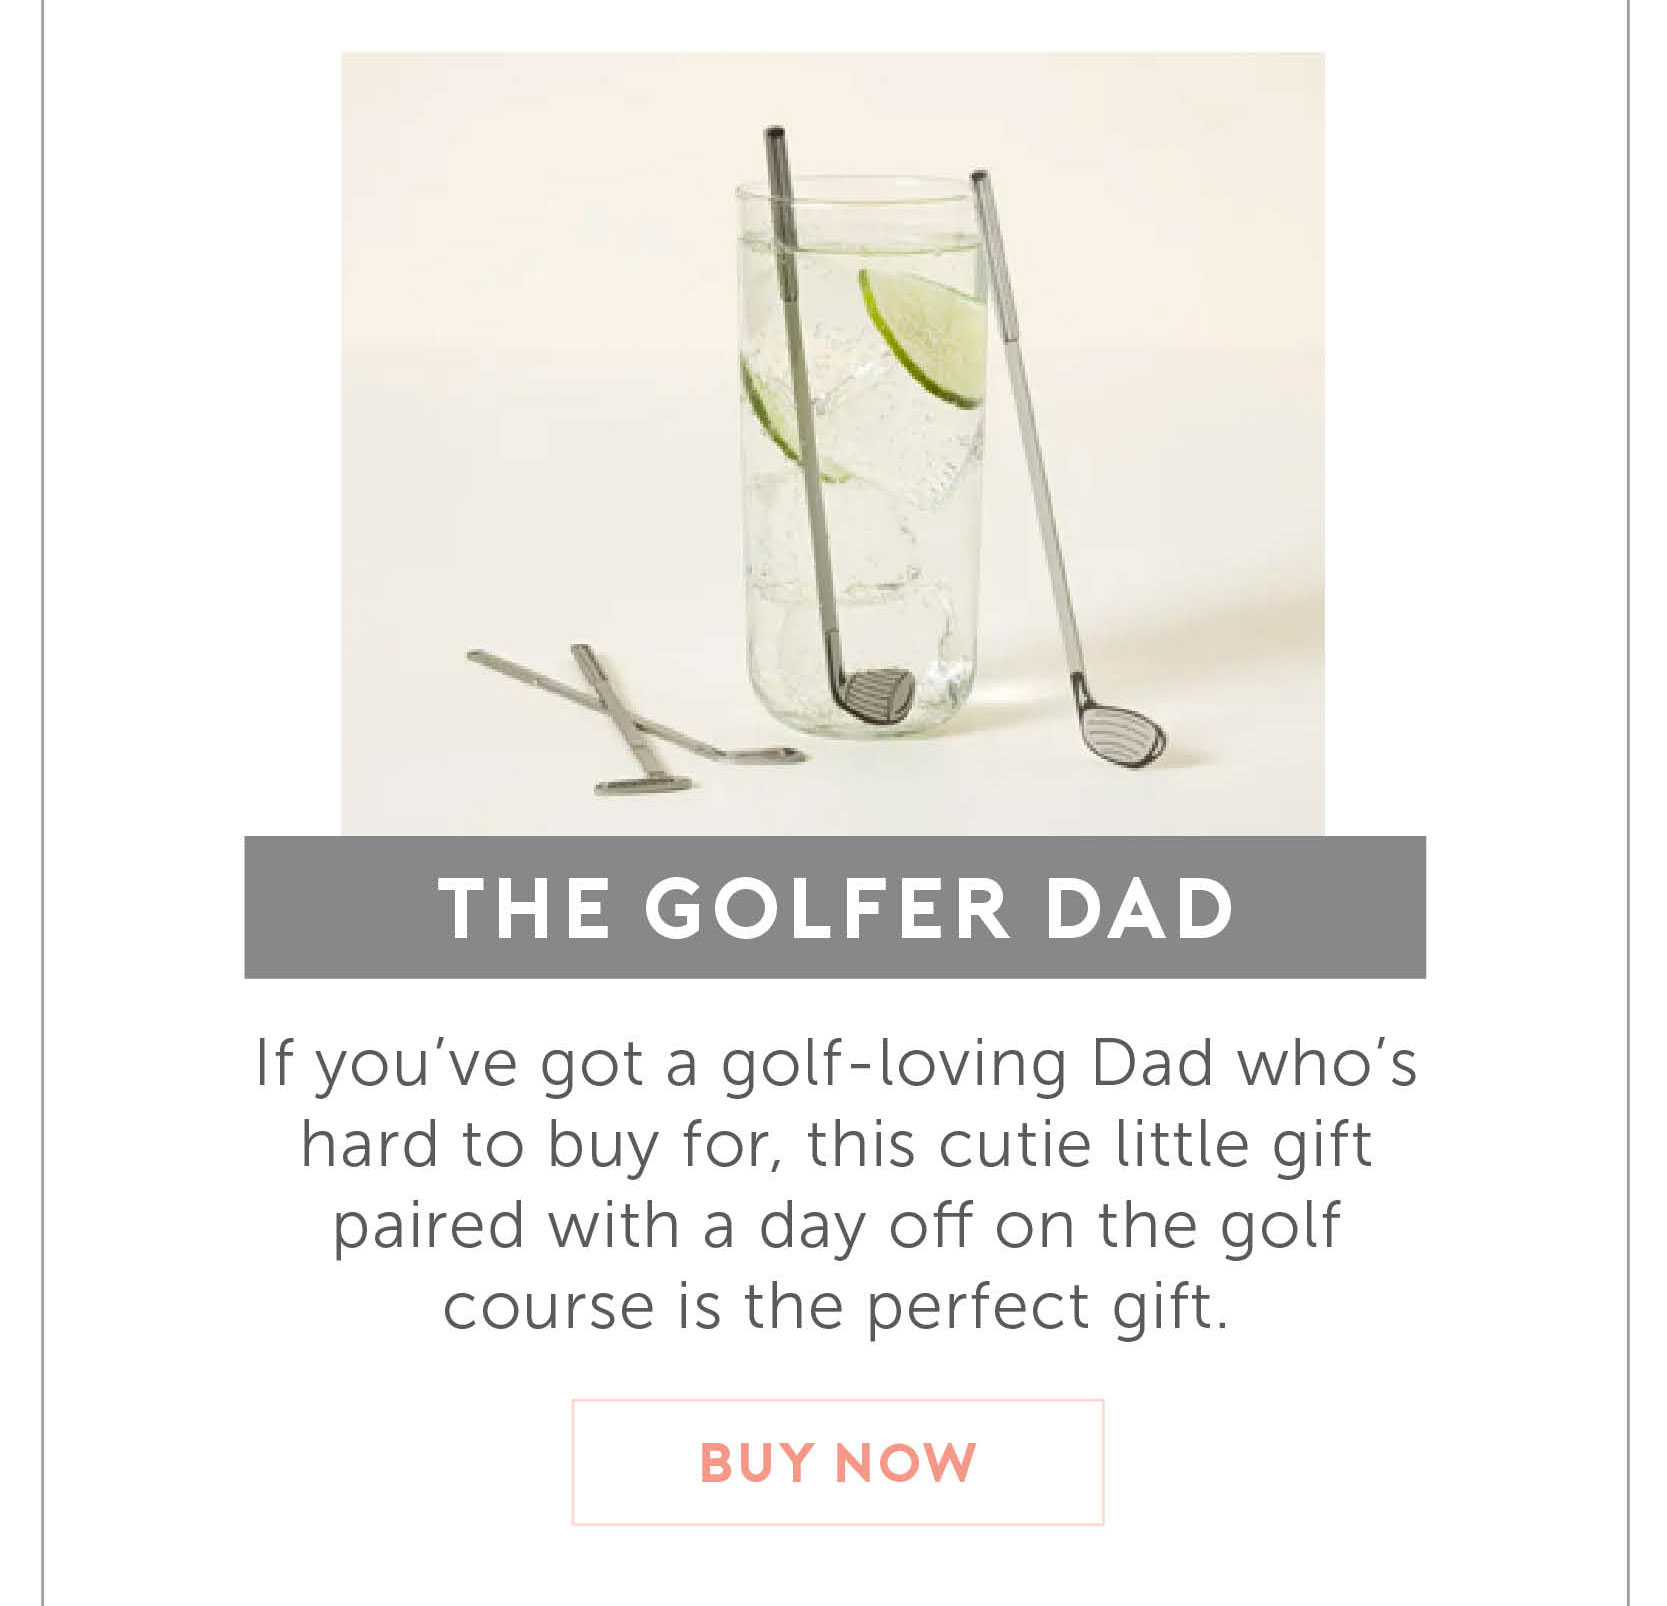 For the Golf Dad. If you’ve got a gold loving Dad whose hard to buy for, this cutie little gift paired with a day off on the golf course is the perfect gift this Father’s Day.